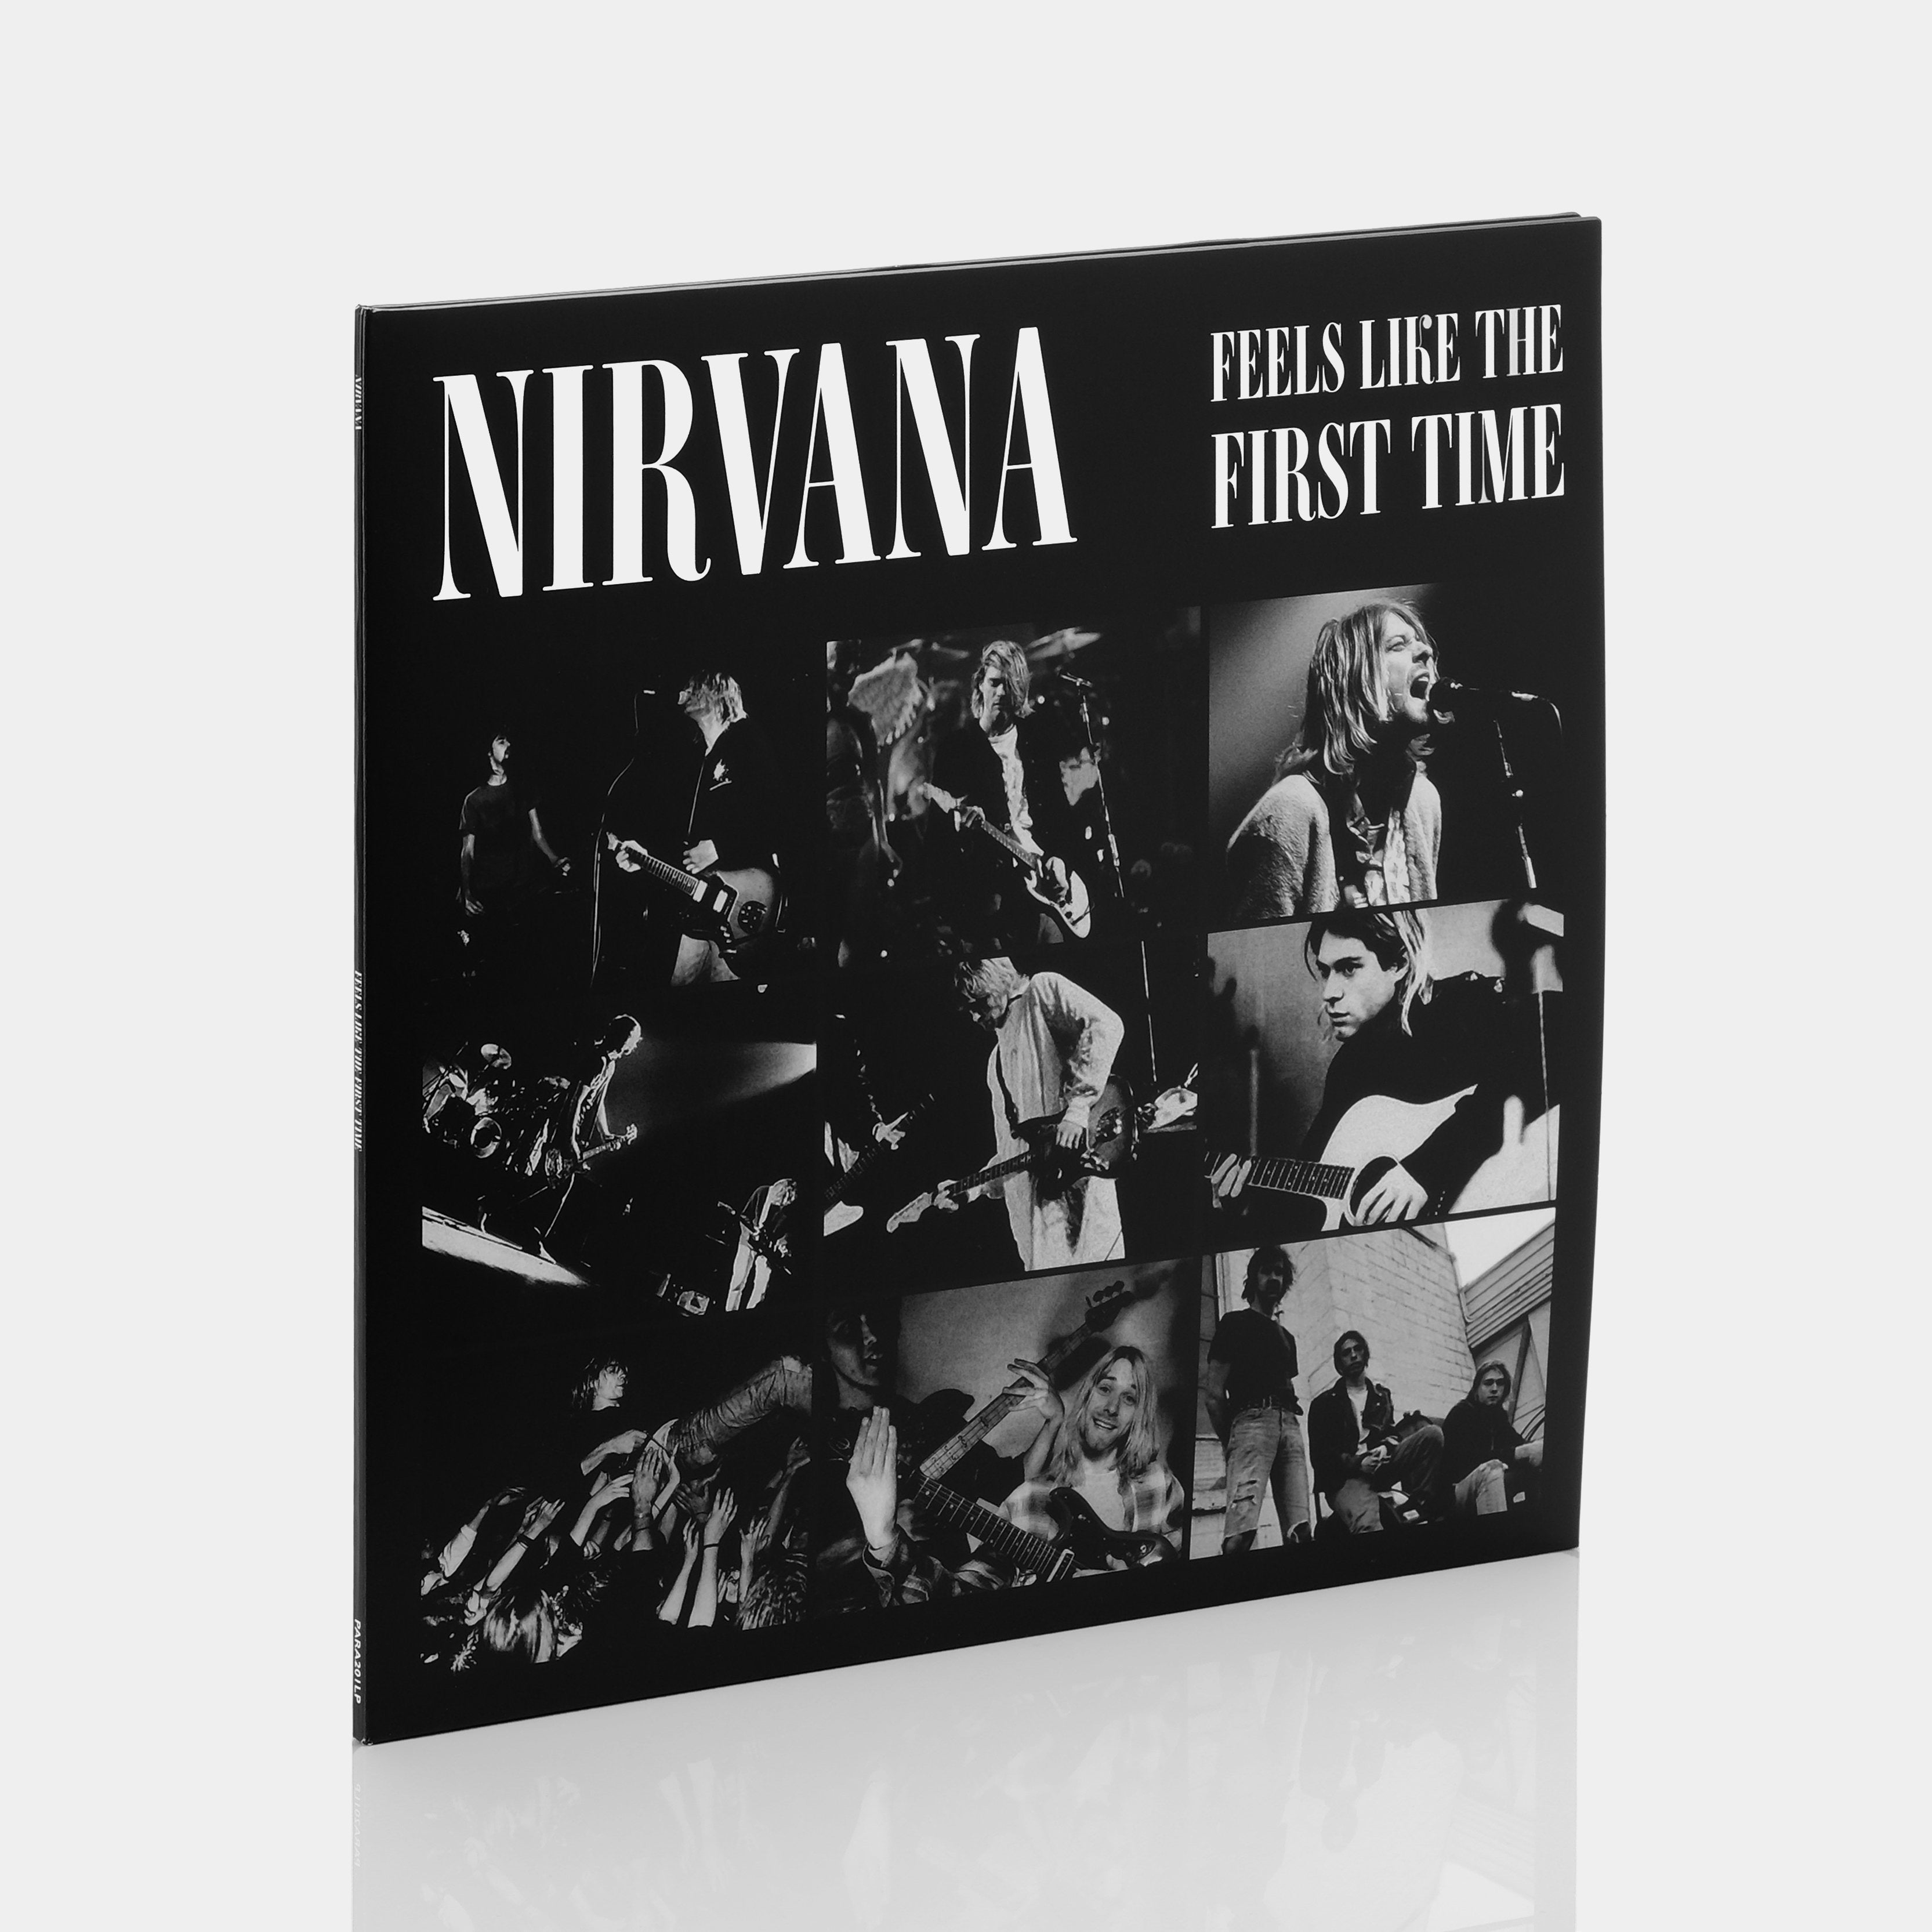 Nirvana - Feels Like The First Time 2xLP Vinyl Record